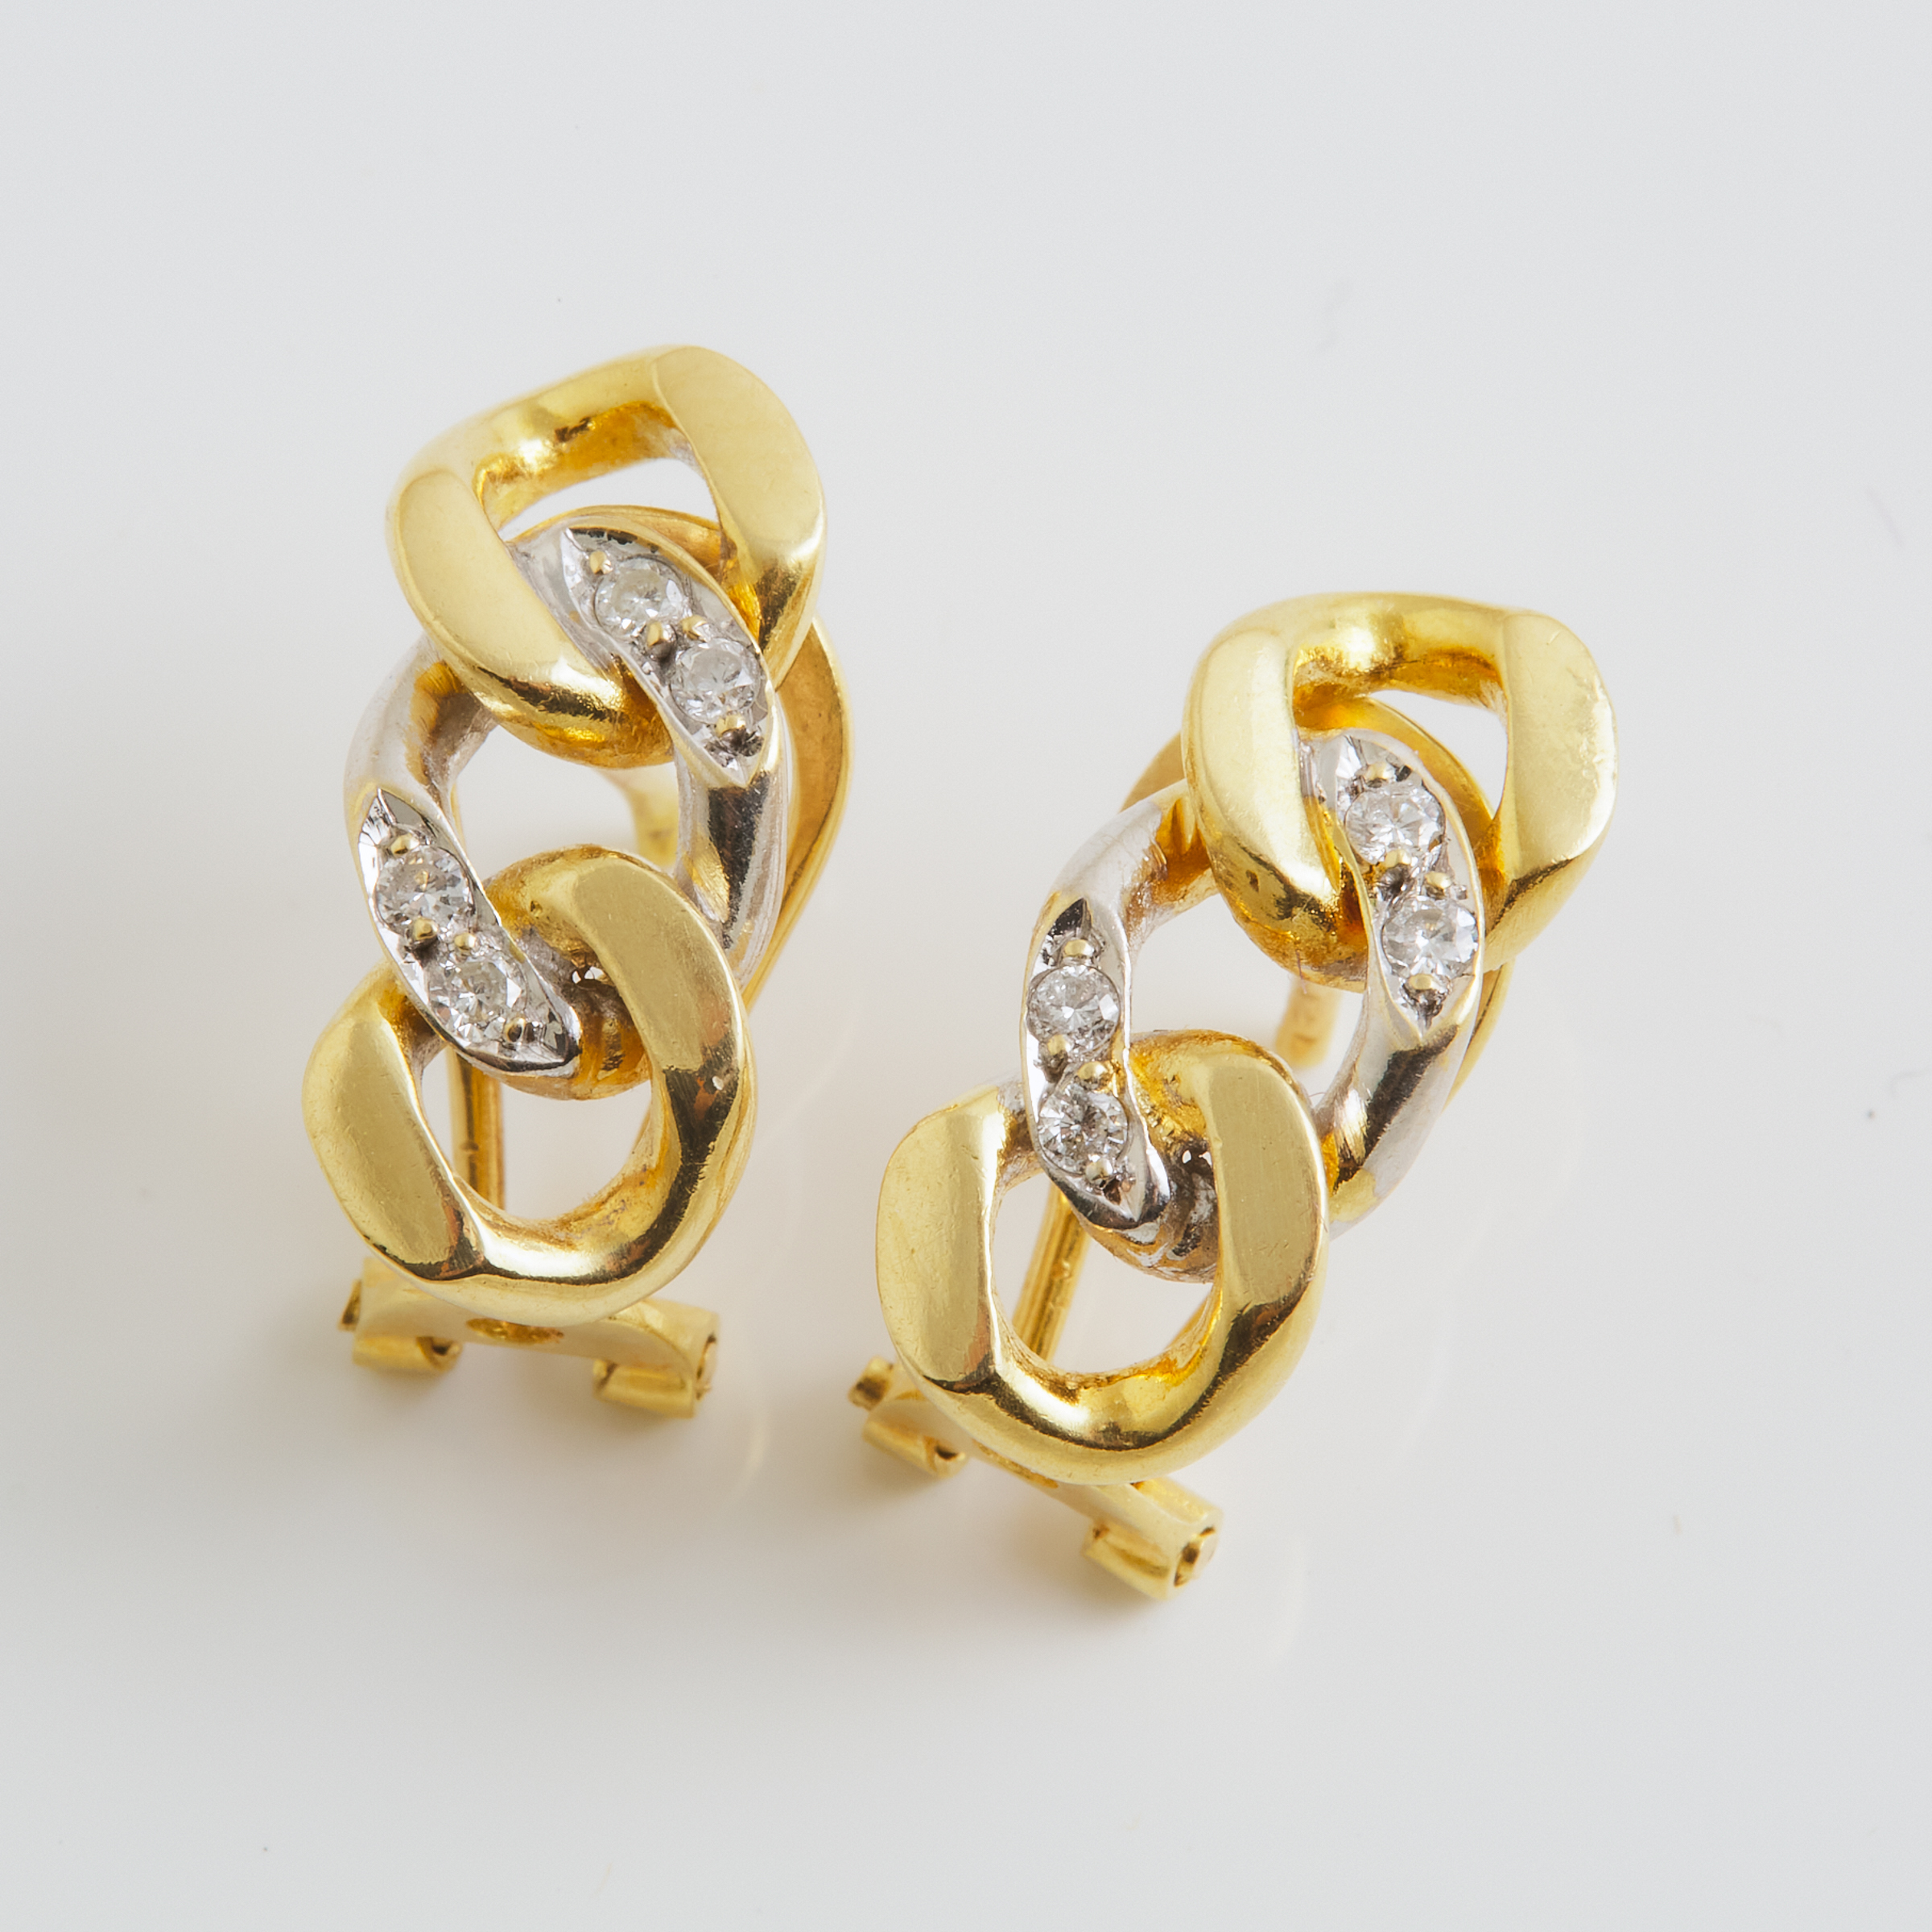 Pair Of 18k Yellow And White Gold Earrings